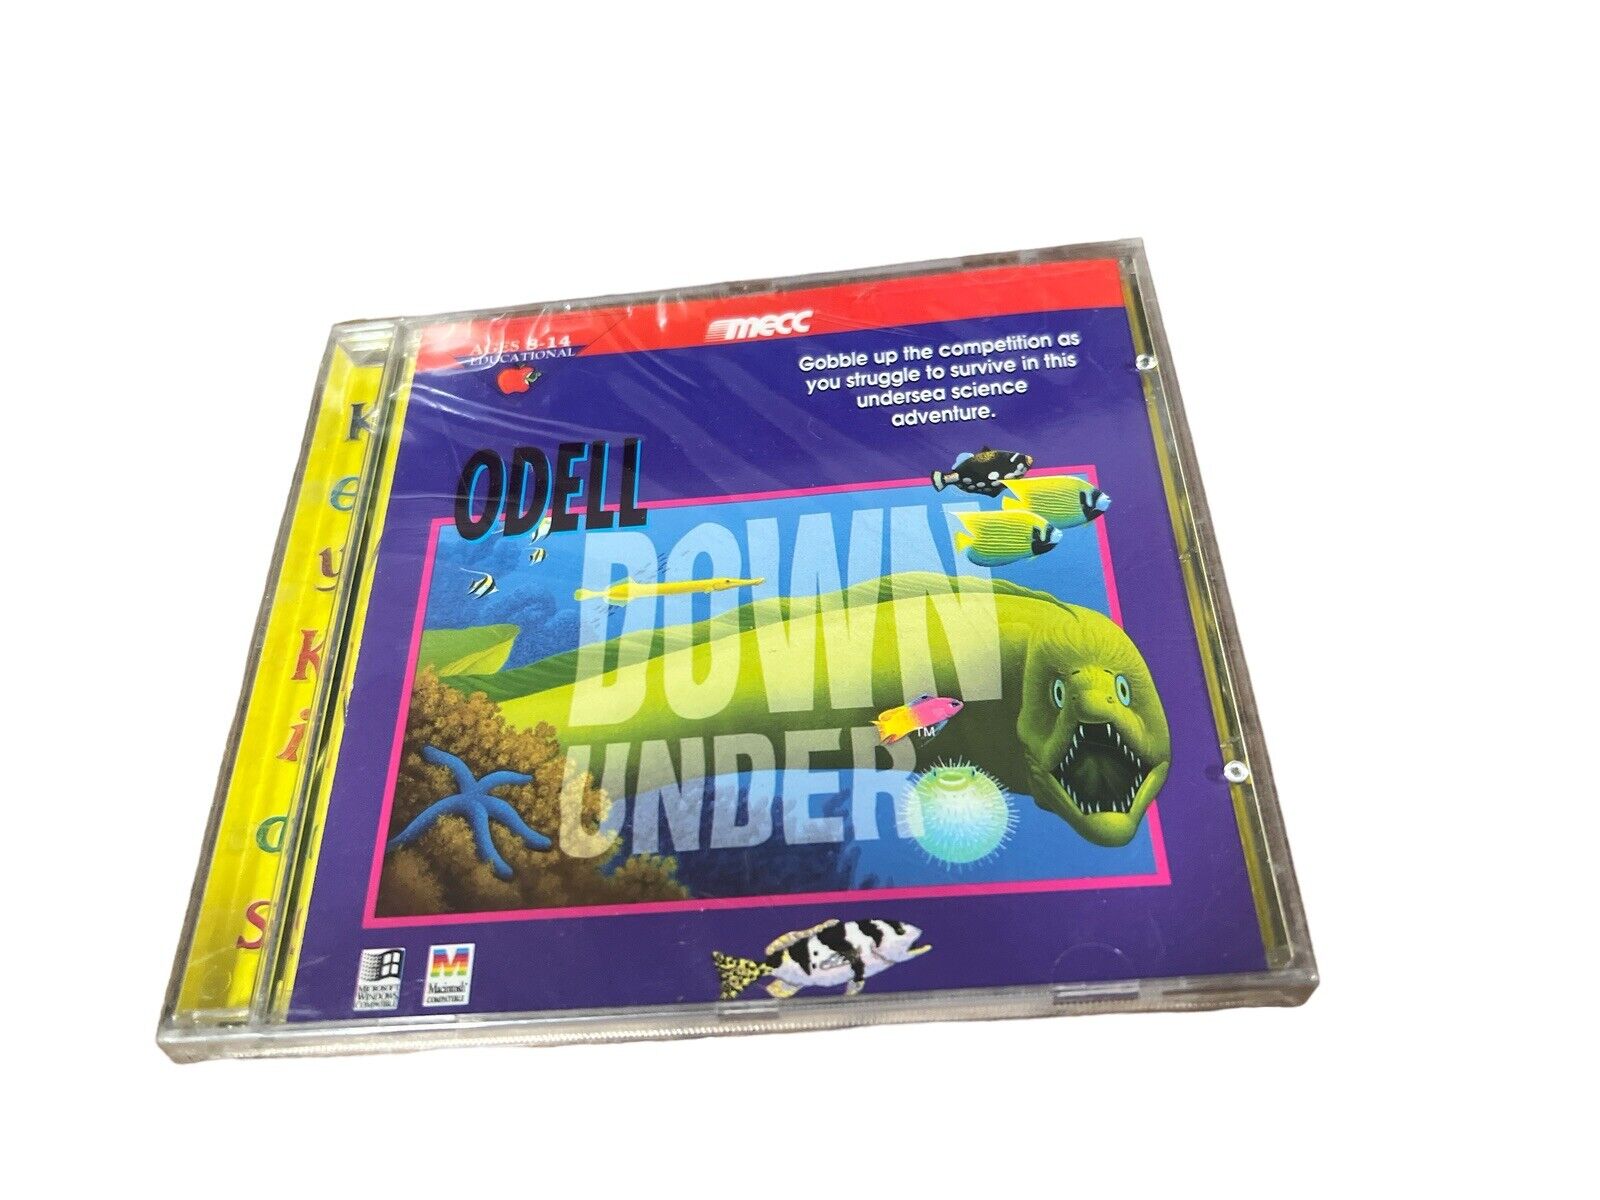 ODELL DOWN UNDER 1995 mecc for Windows 3.1 & MAC OS 6- Brand New Sealed